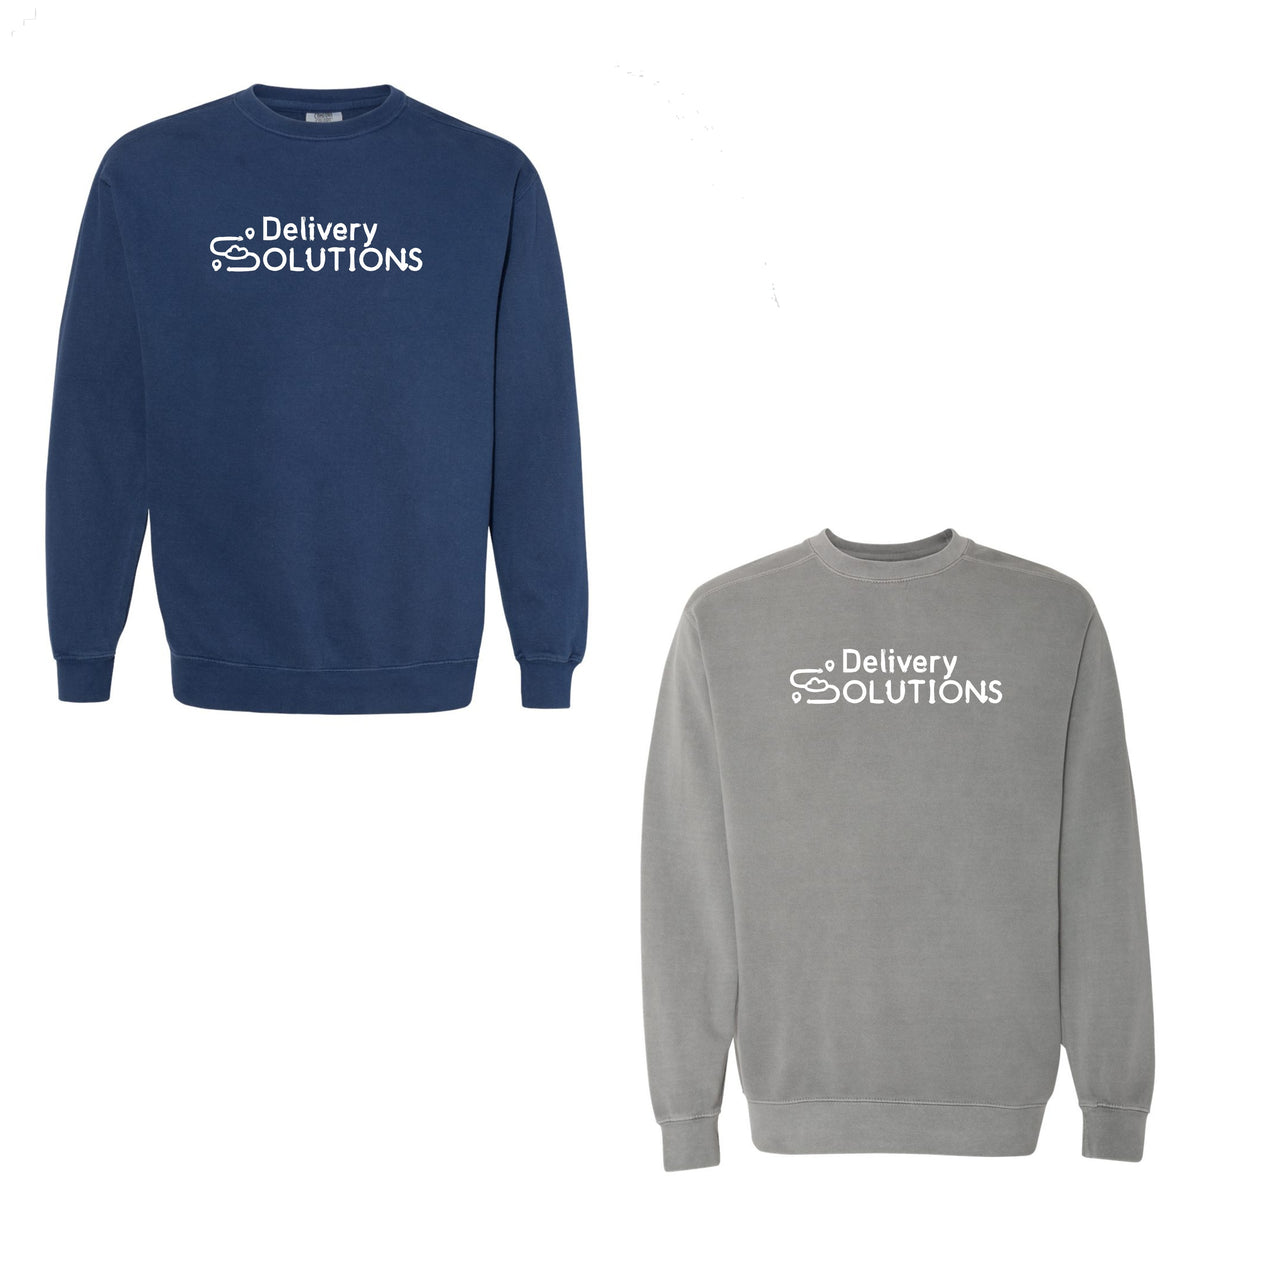 Adult - Unisex Garment-Dyed Sweatshirt - Comfort Colors (Delivery Solutions)